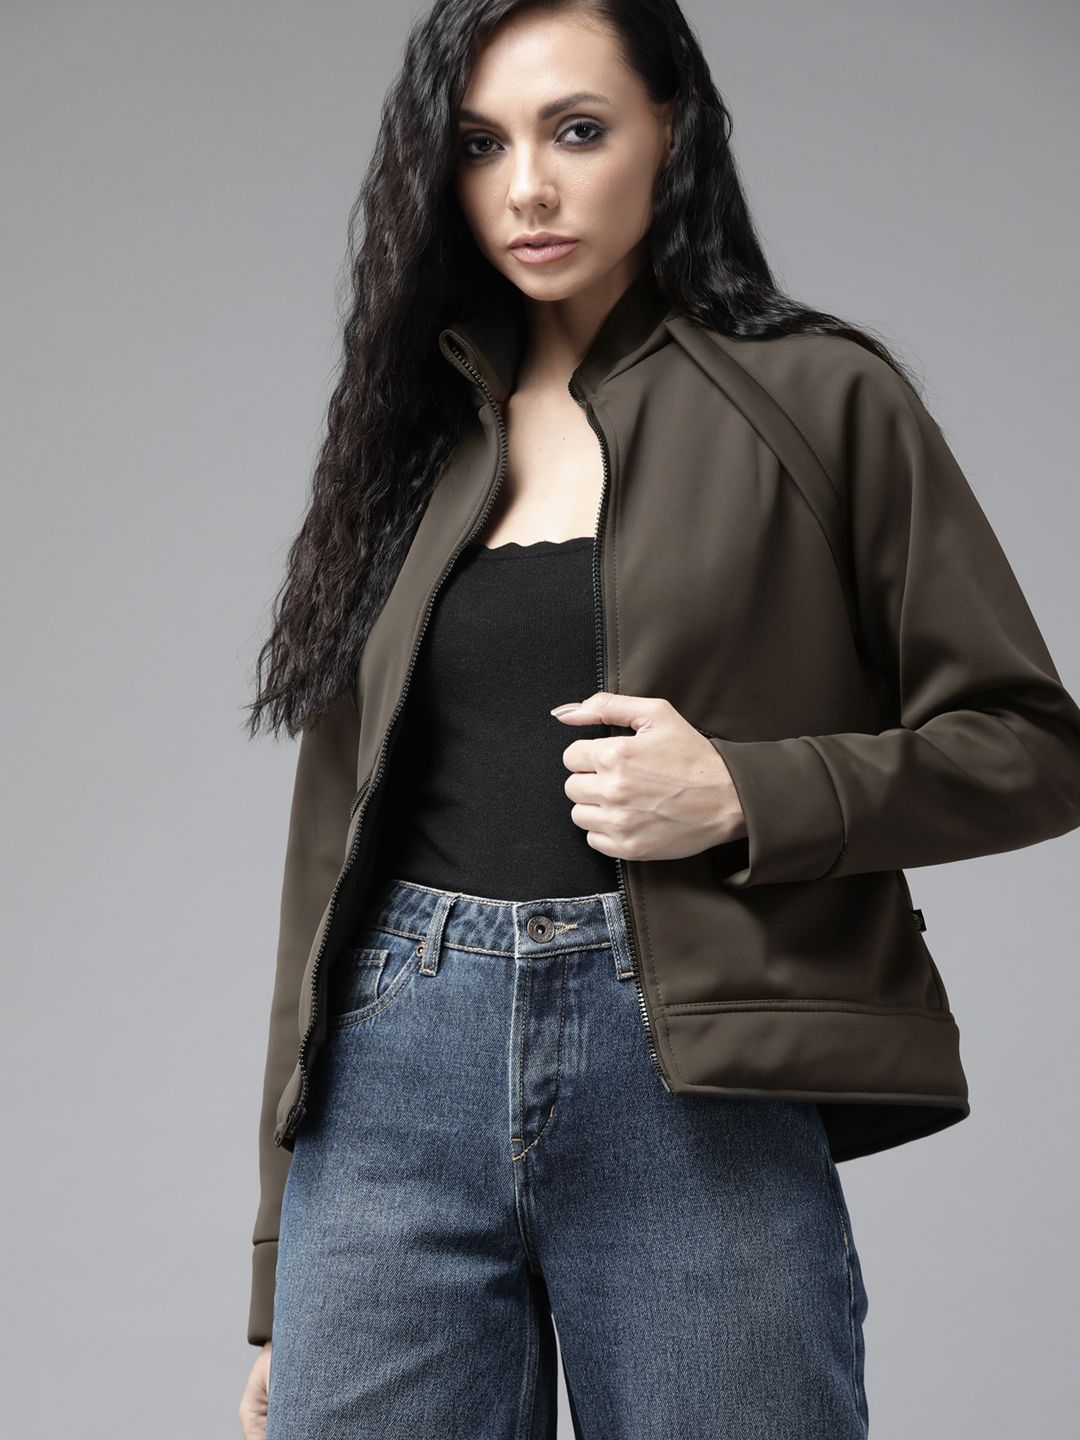 Roadster Women Olive Green Solid Convertible Jacket Price in India